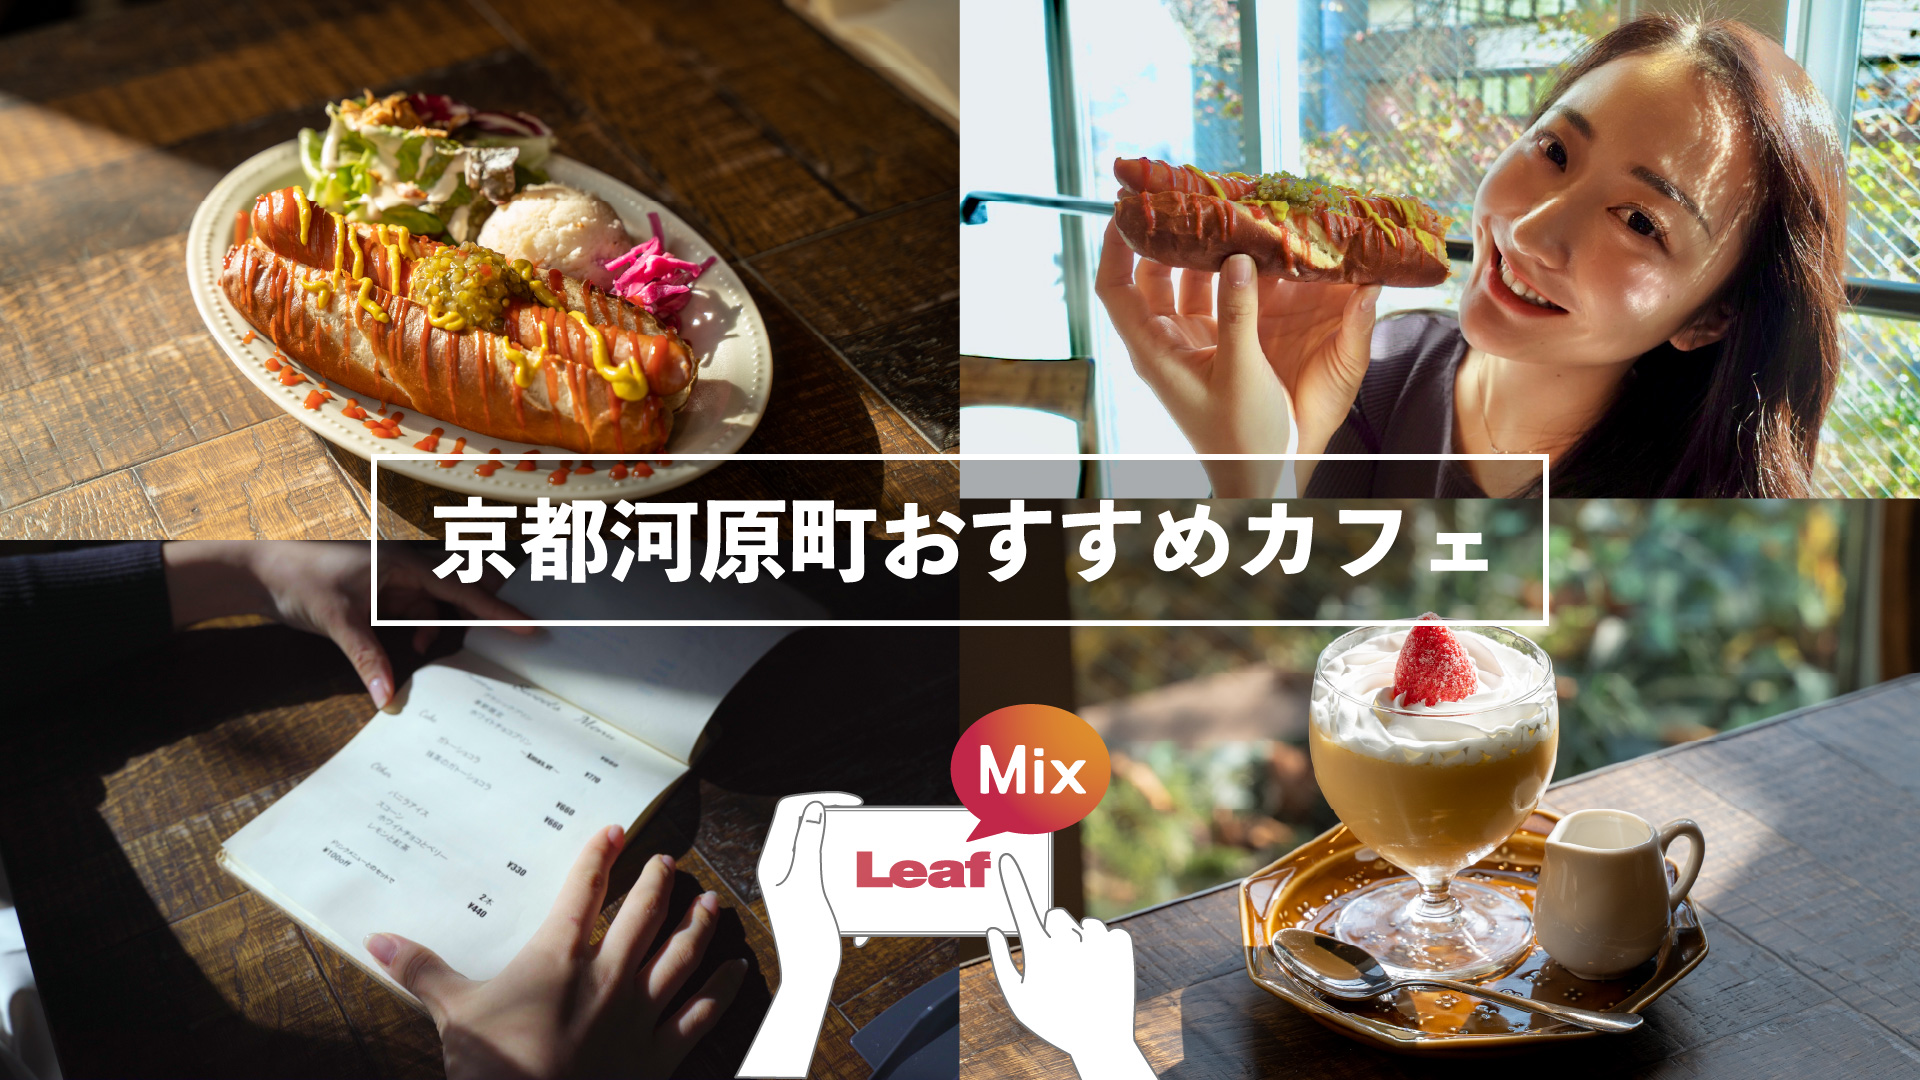 Leafmix 京都河原町のおすすめカフェランチ M エム Kyoto By Leaf